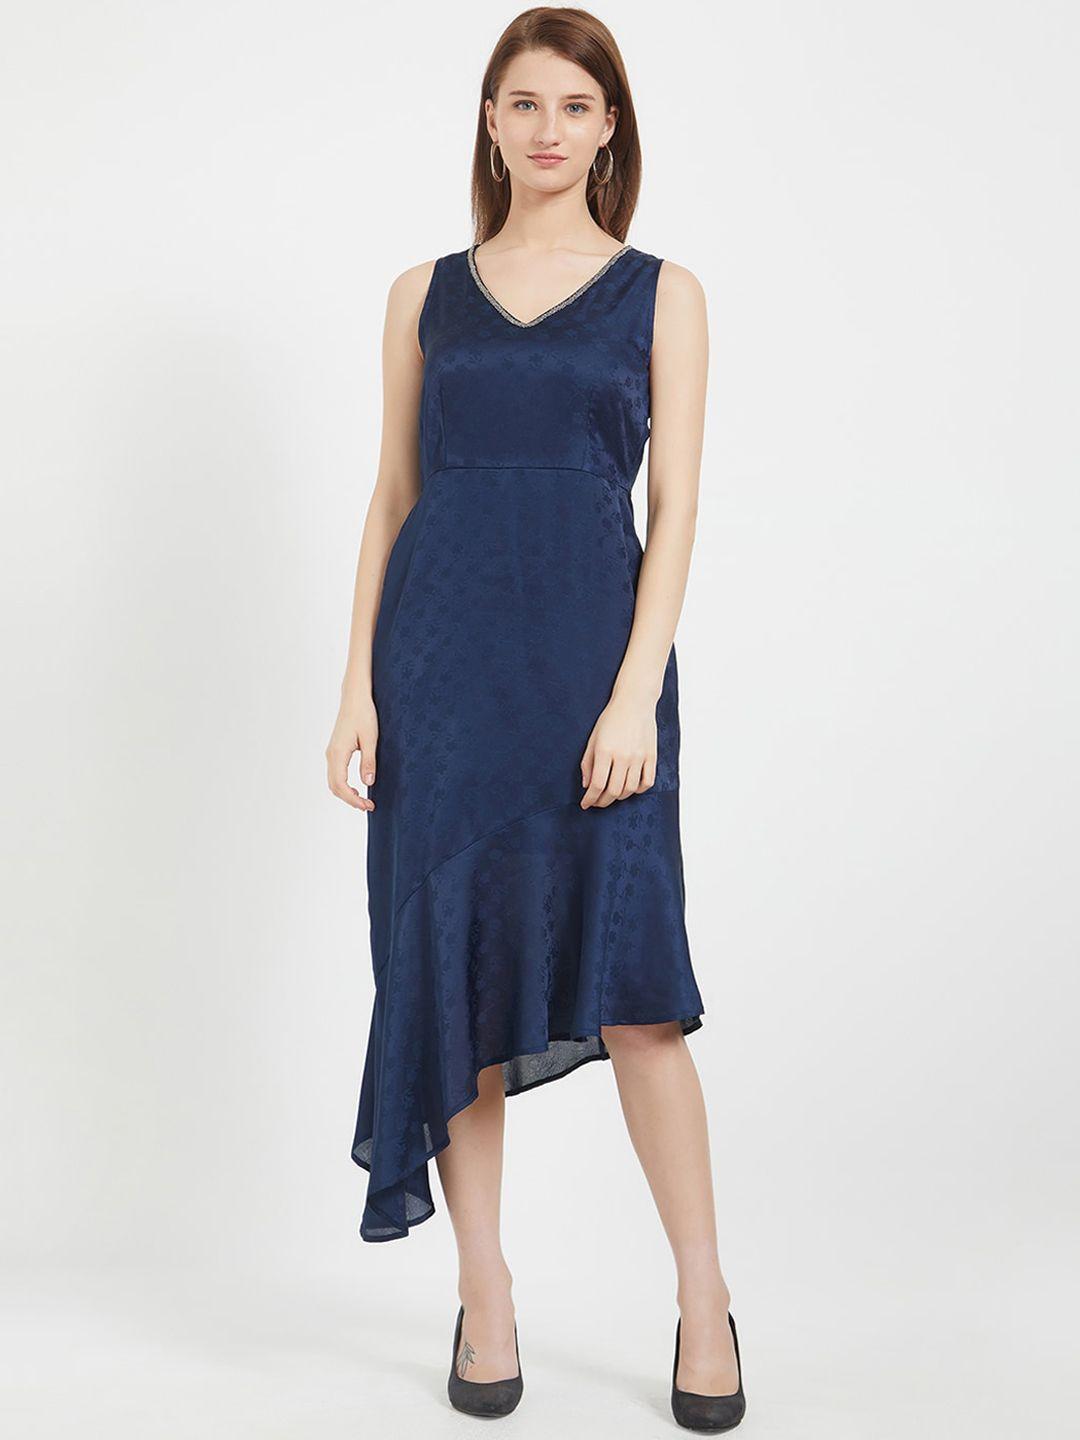 109f women navy blue self design fit and flare dress